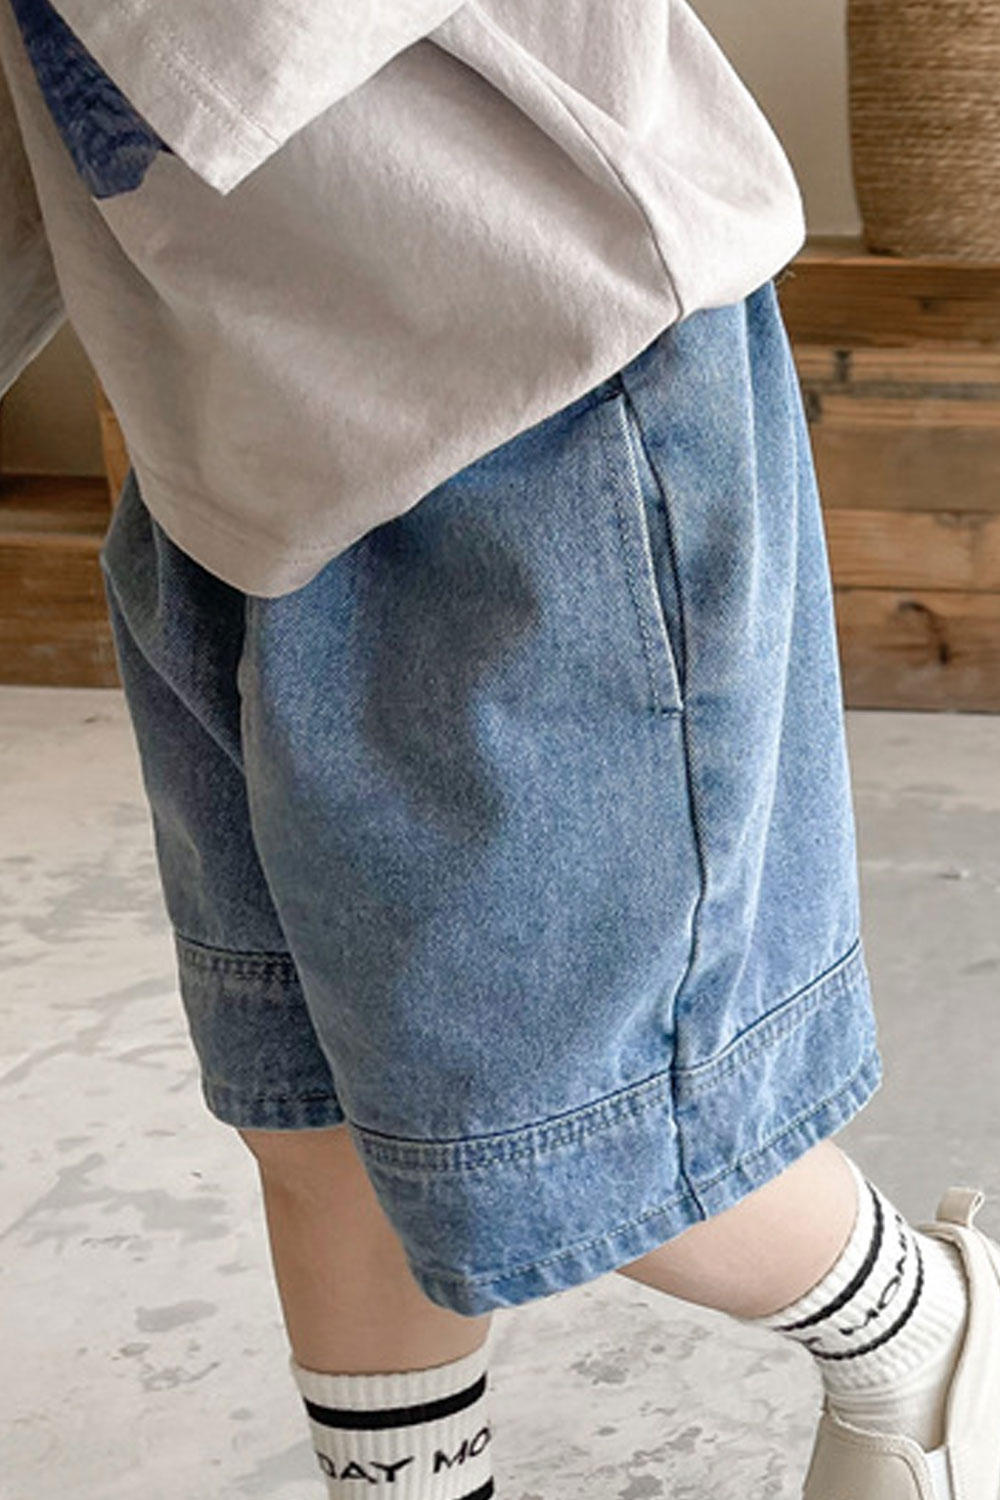 Ketty More Kids Boys New Fashionable High Waist Elastic Belt Solid Color Pattern Sports Style Summer Trendy Casual Five-Point Pants Denim S